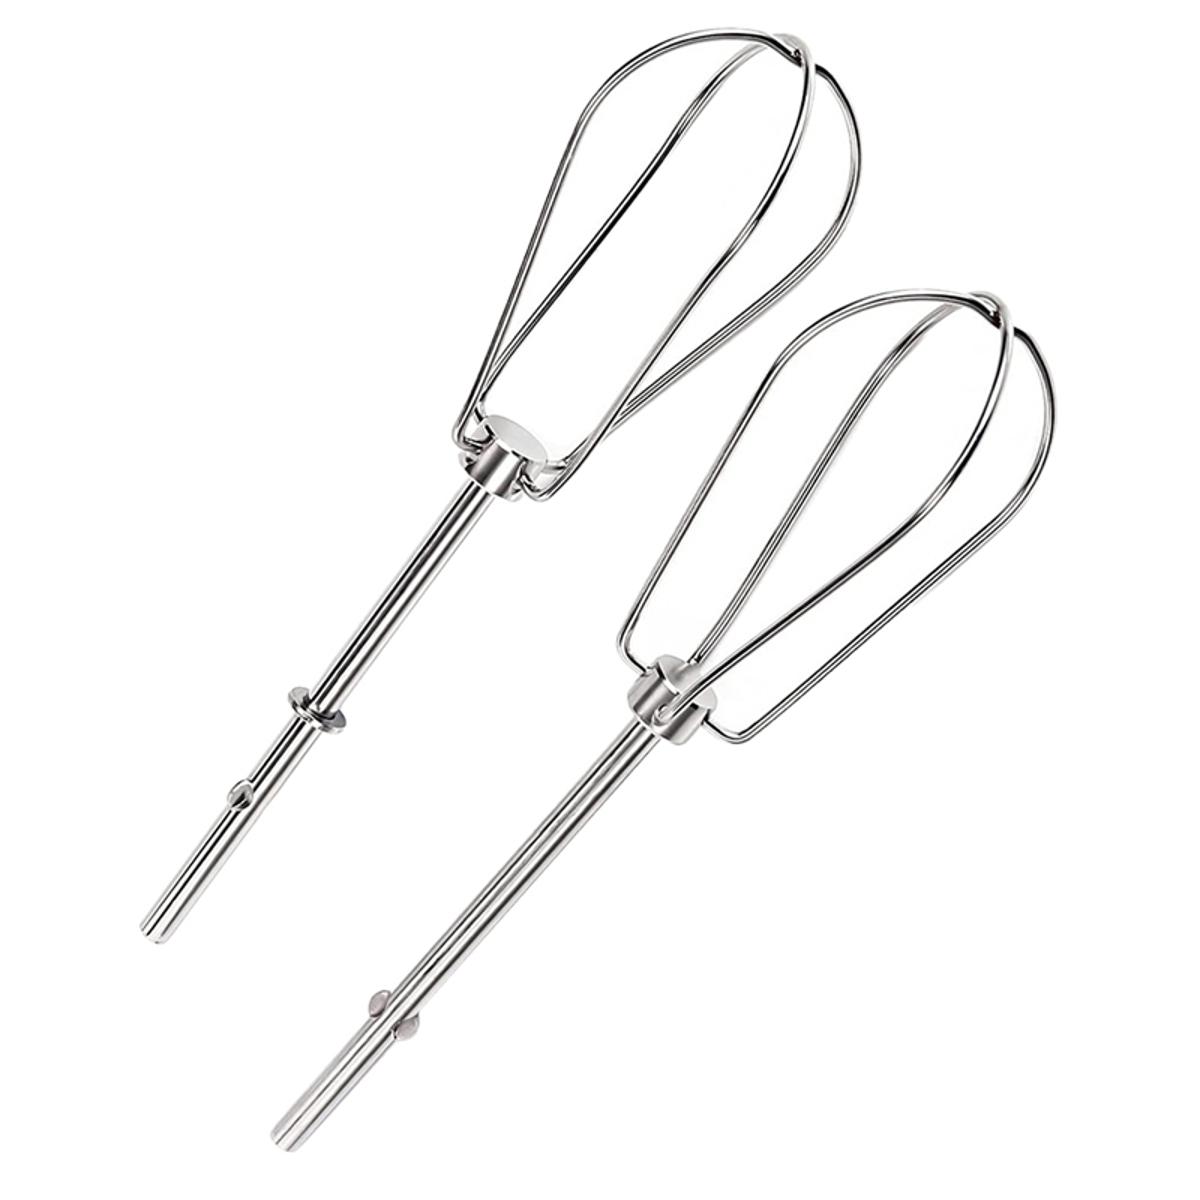 W10490648 Hand Mixer Attachment Beaters for KitchenAid KHM2B, AP5644233,  PS4082859 Replacements. 